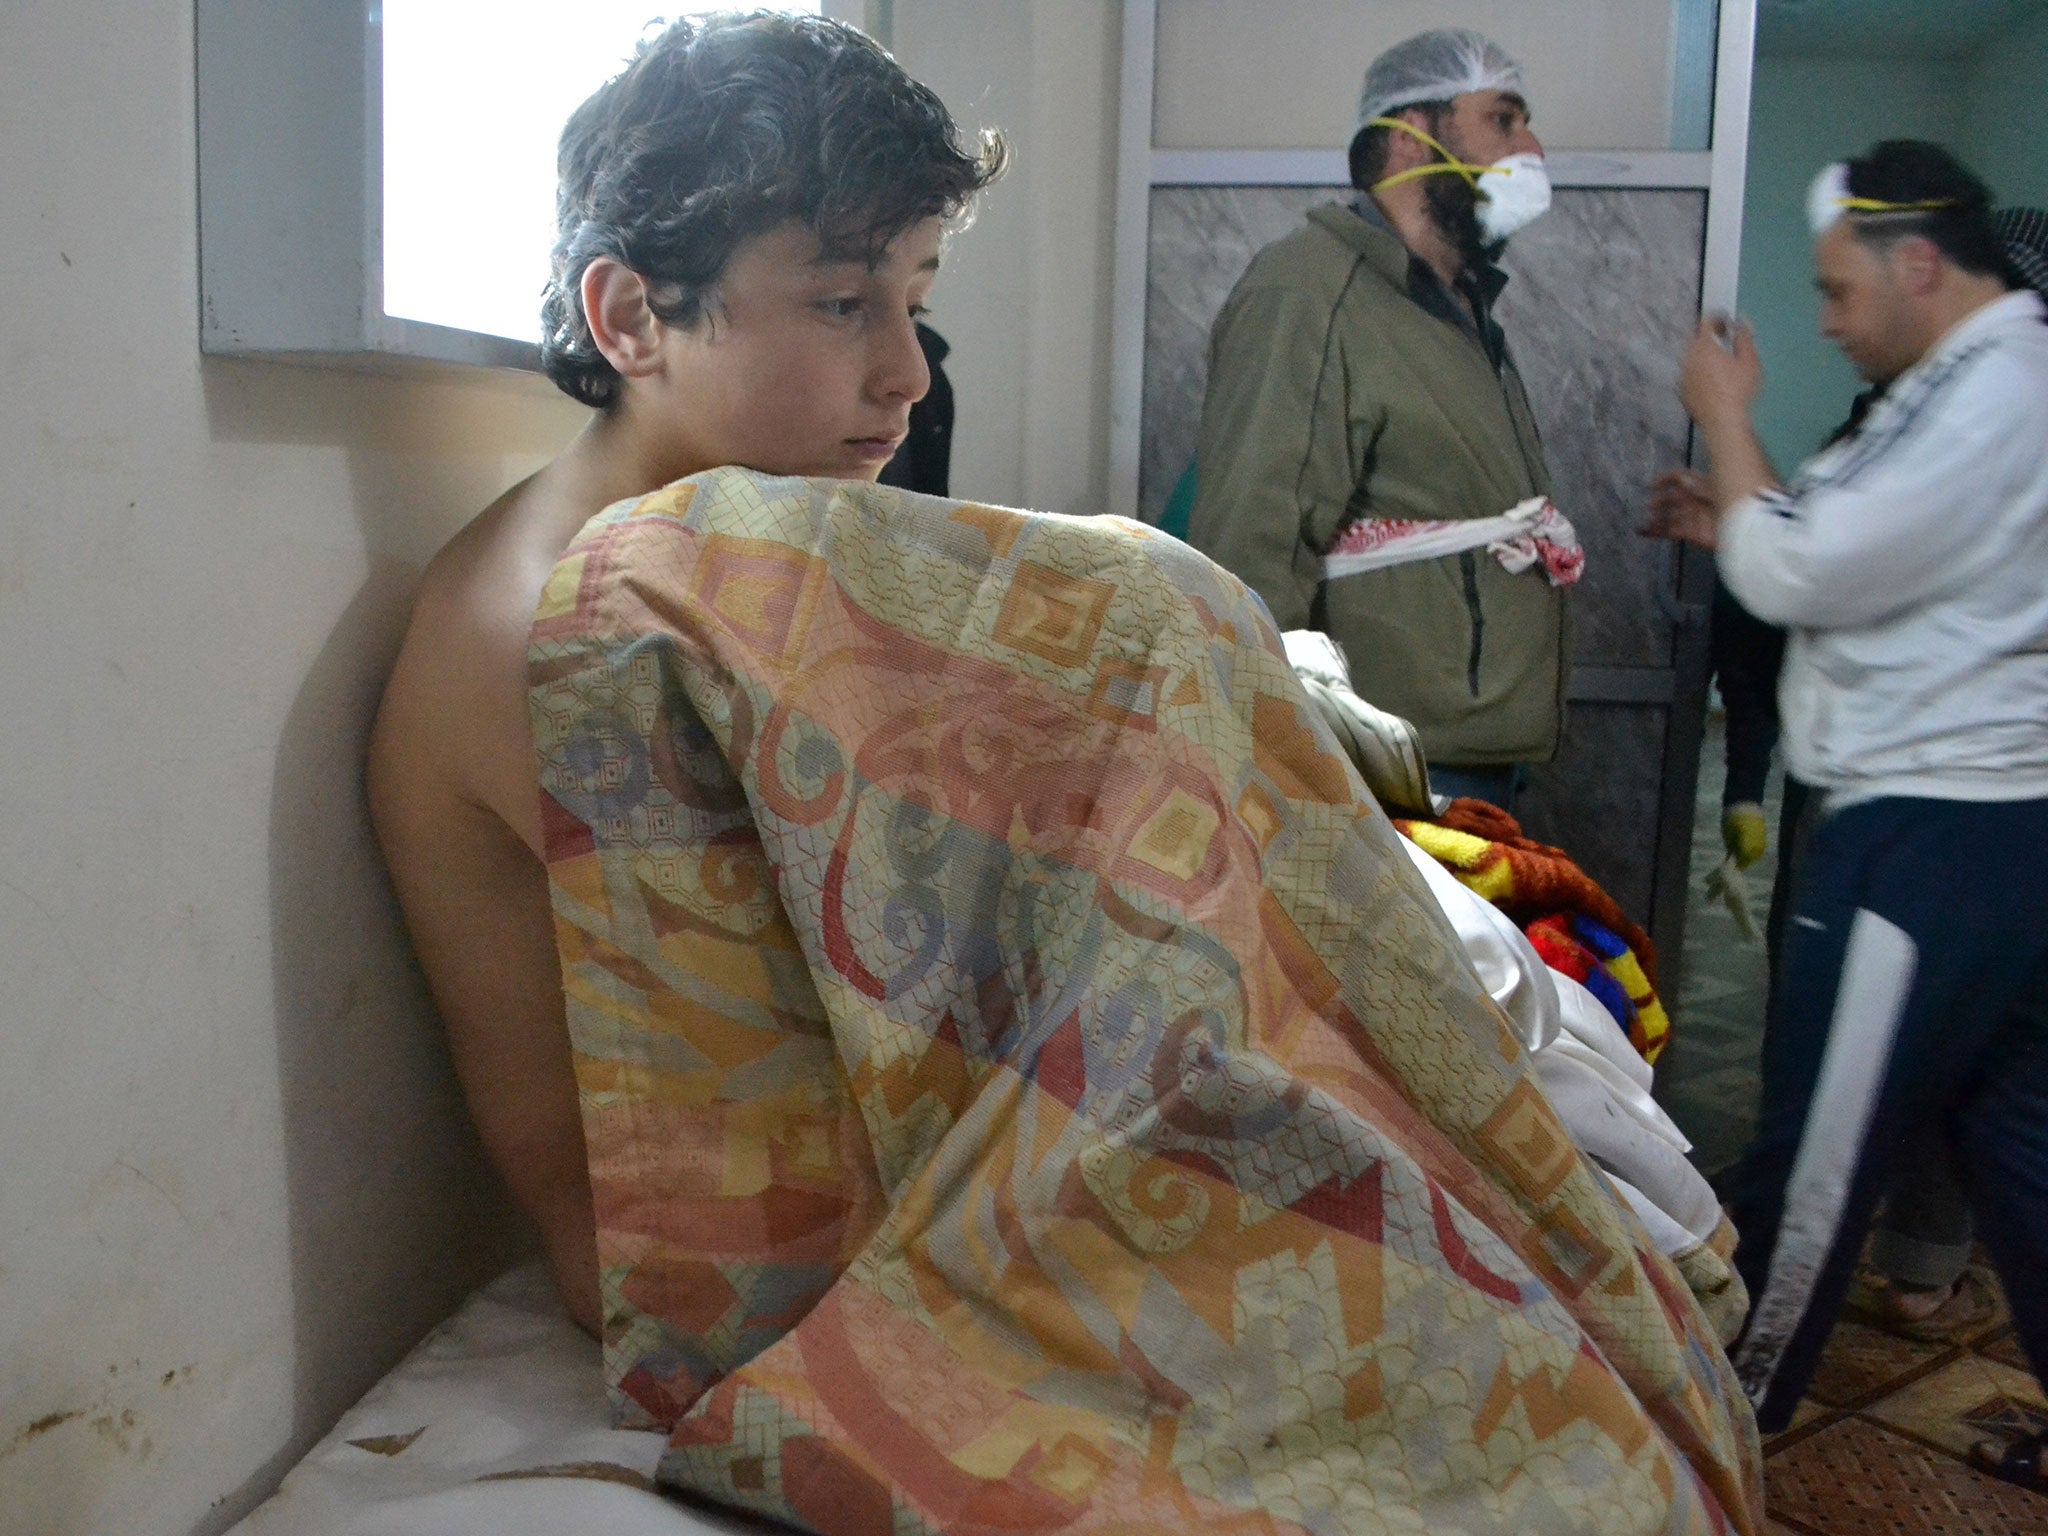 A young man sits on a bed on March 17, 2015 at a clinic in the village of Sarmin, southeast of Idlib, the capital of Syria's northwestern province of Idlib, following reports of suffocation cases related to an alleged regime gas attack in the area